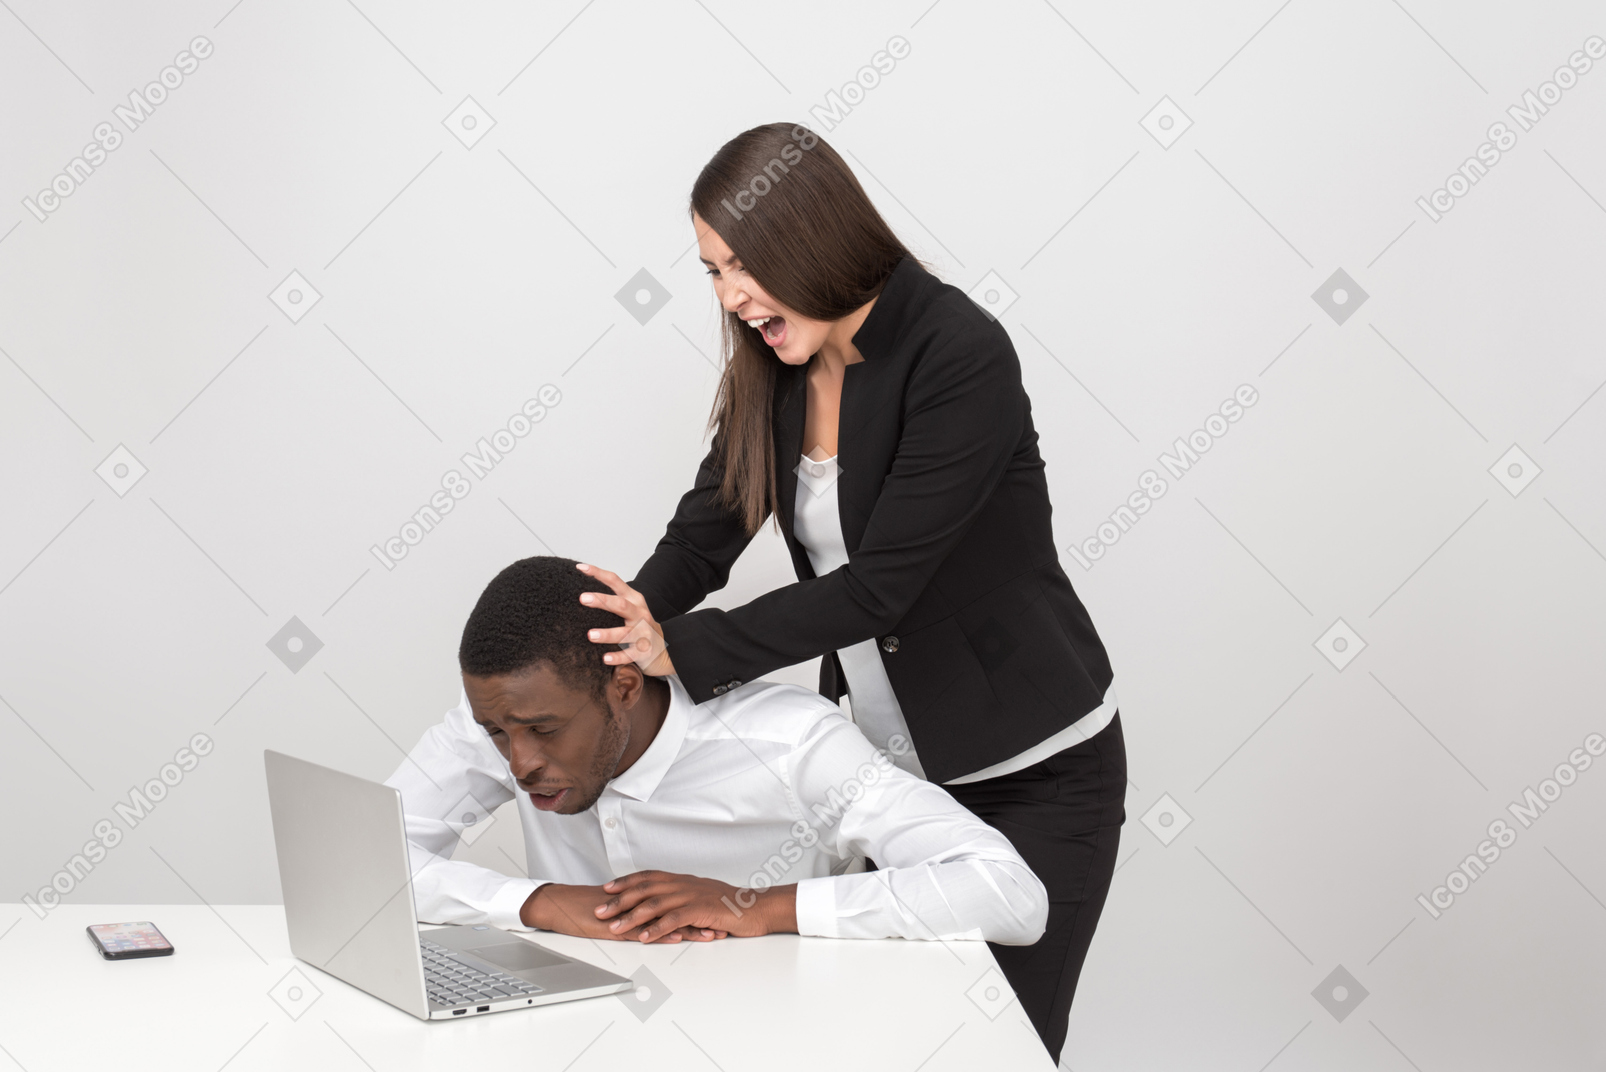 Aggressive female boss pulling her employee's head into a laptop